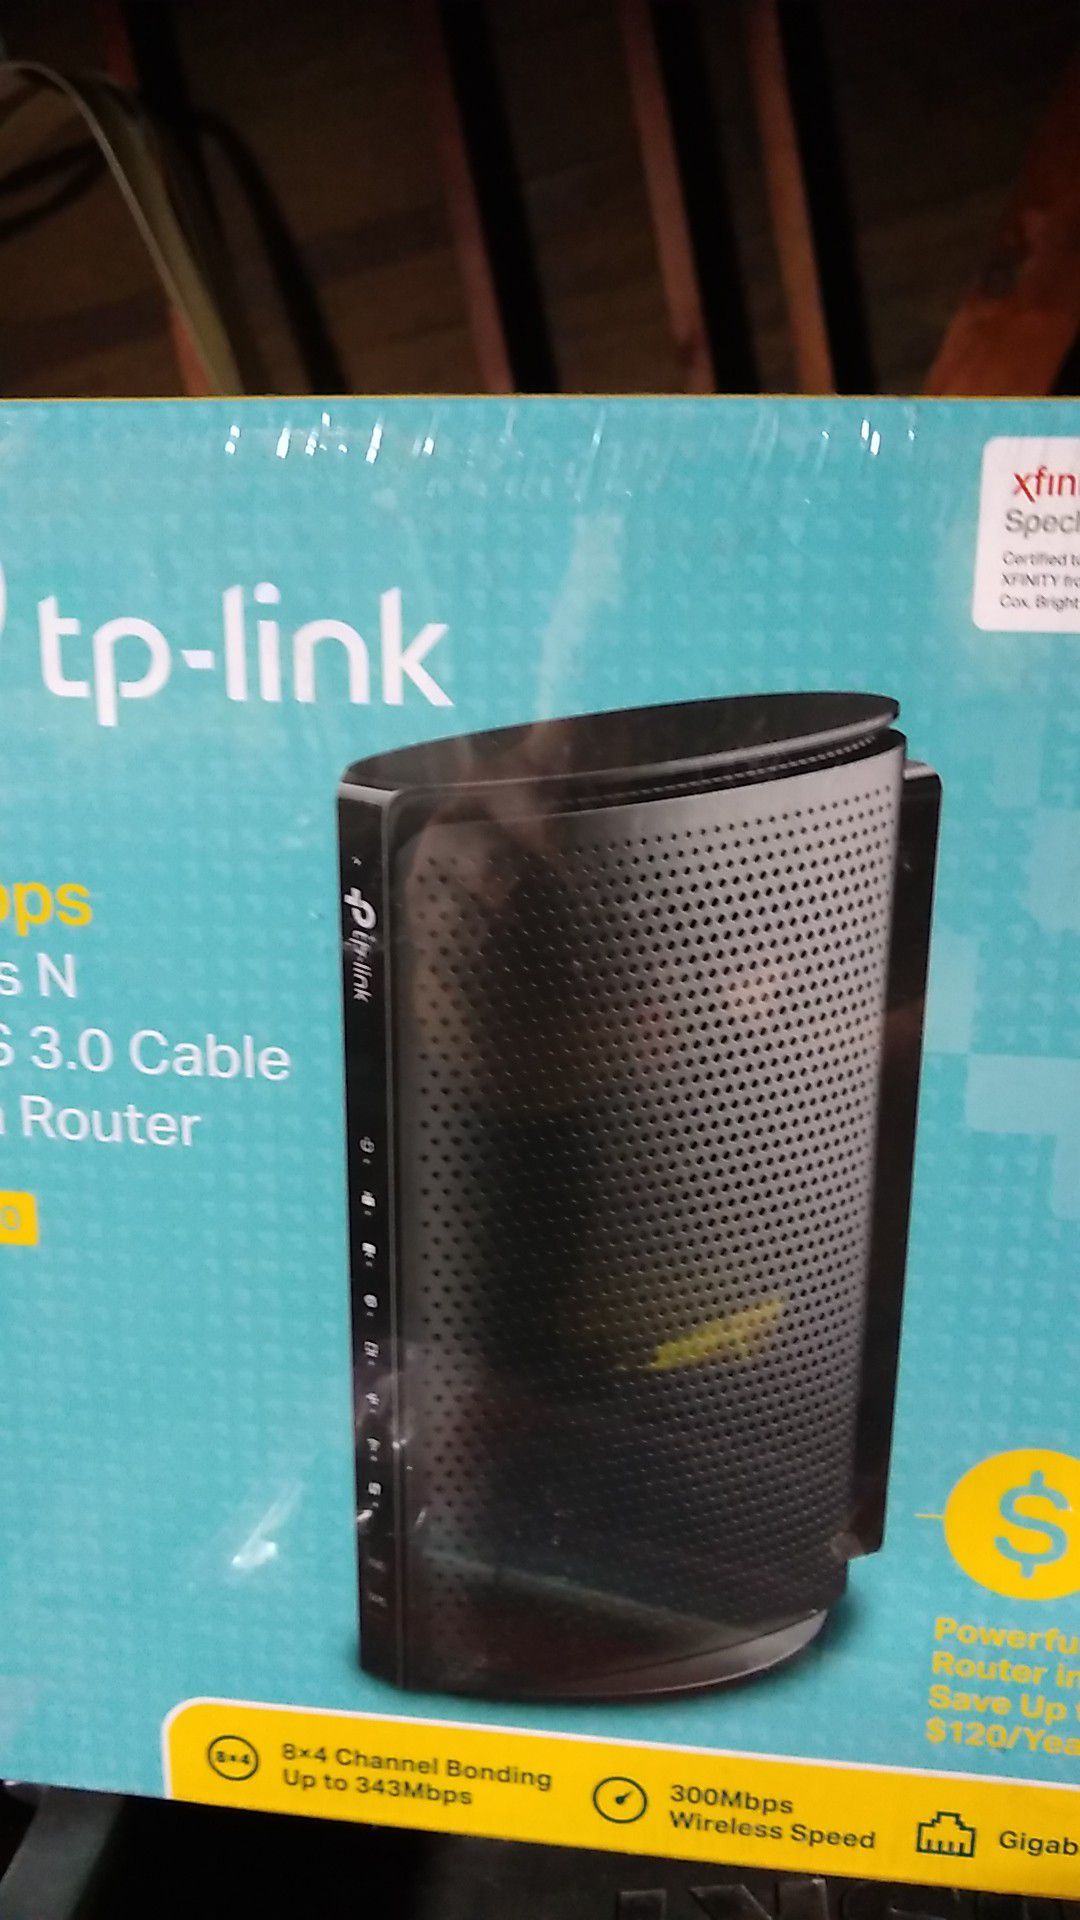 TP-link 300mbps wireless N modem Router